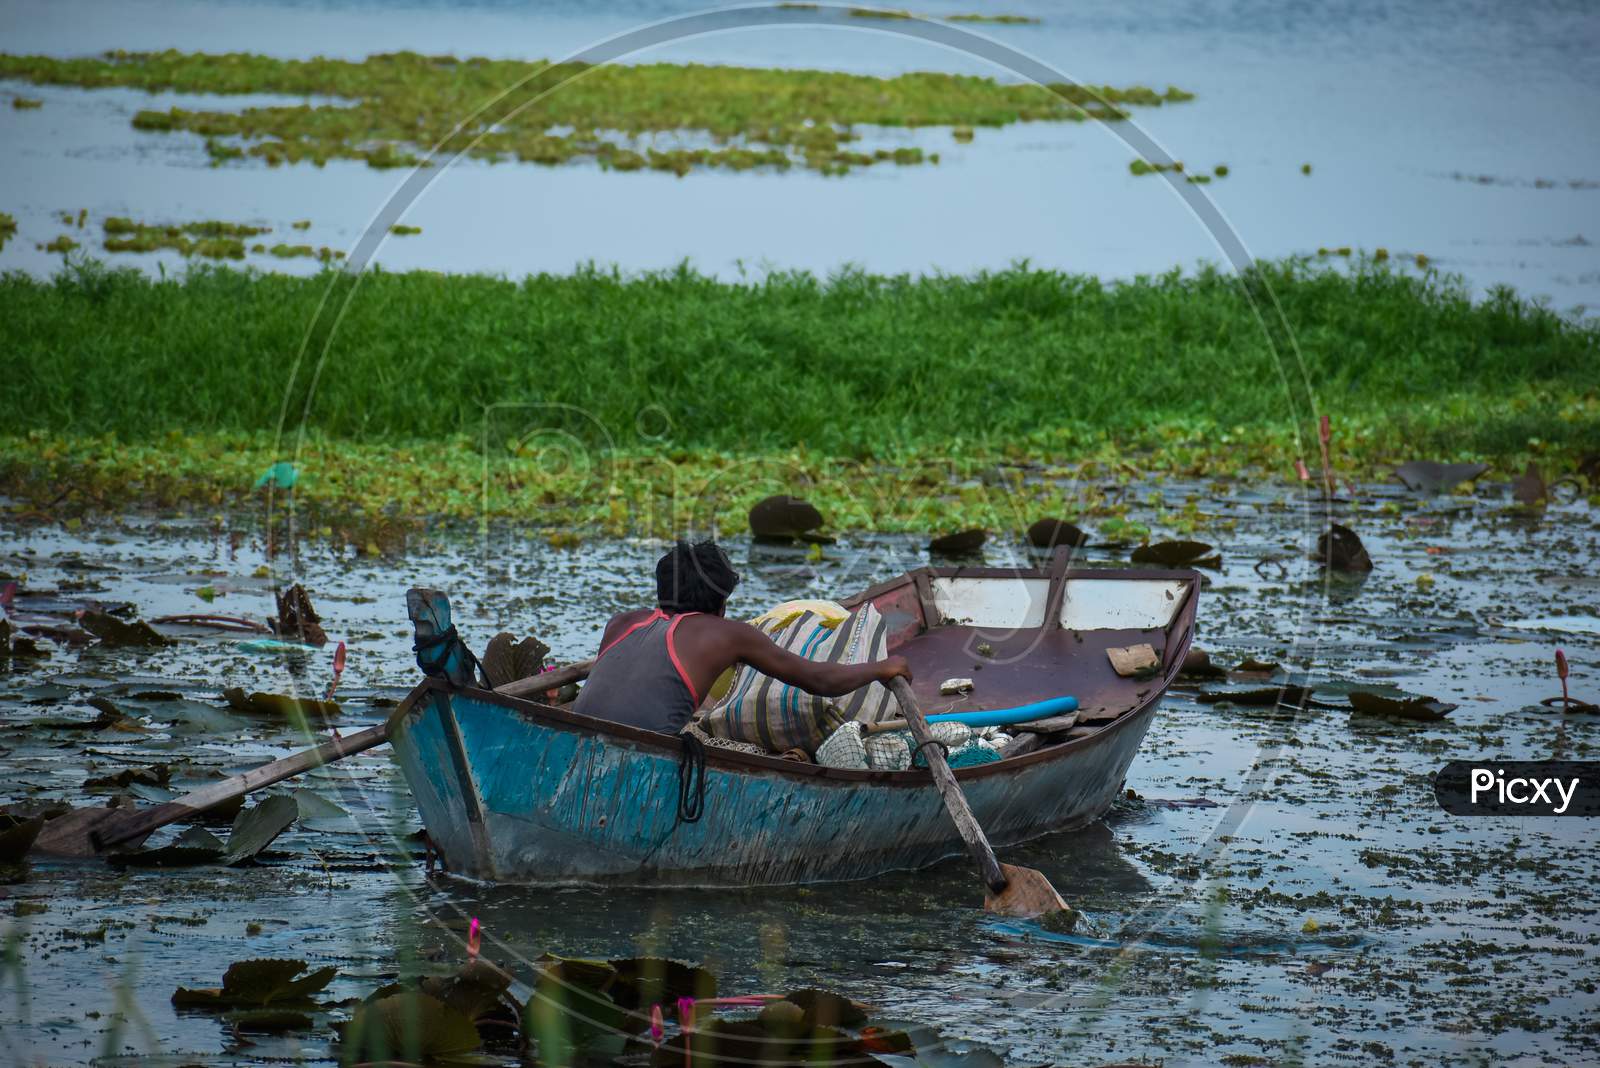 A fisherman driving the boat in the pond